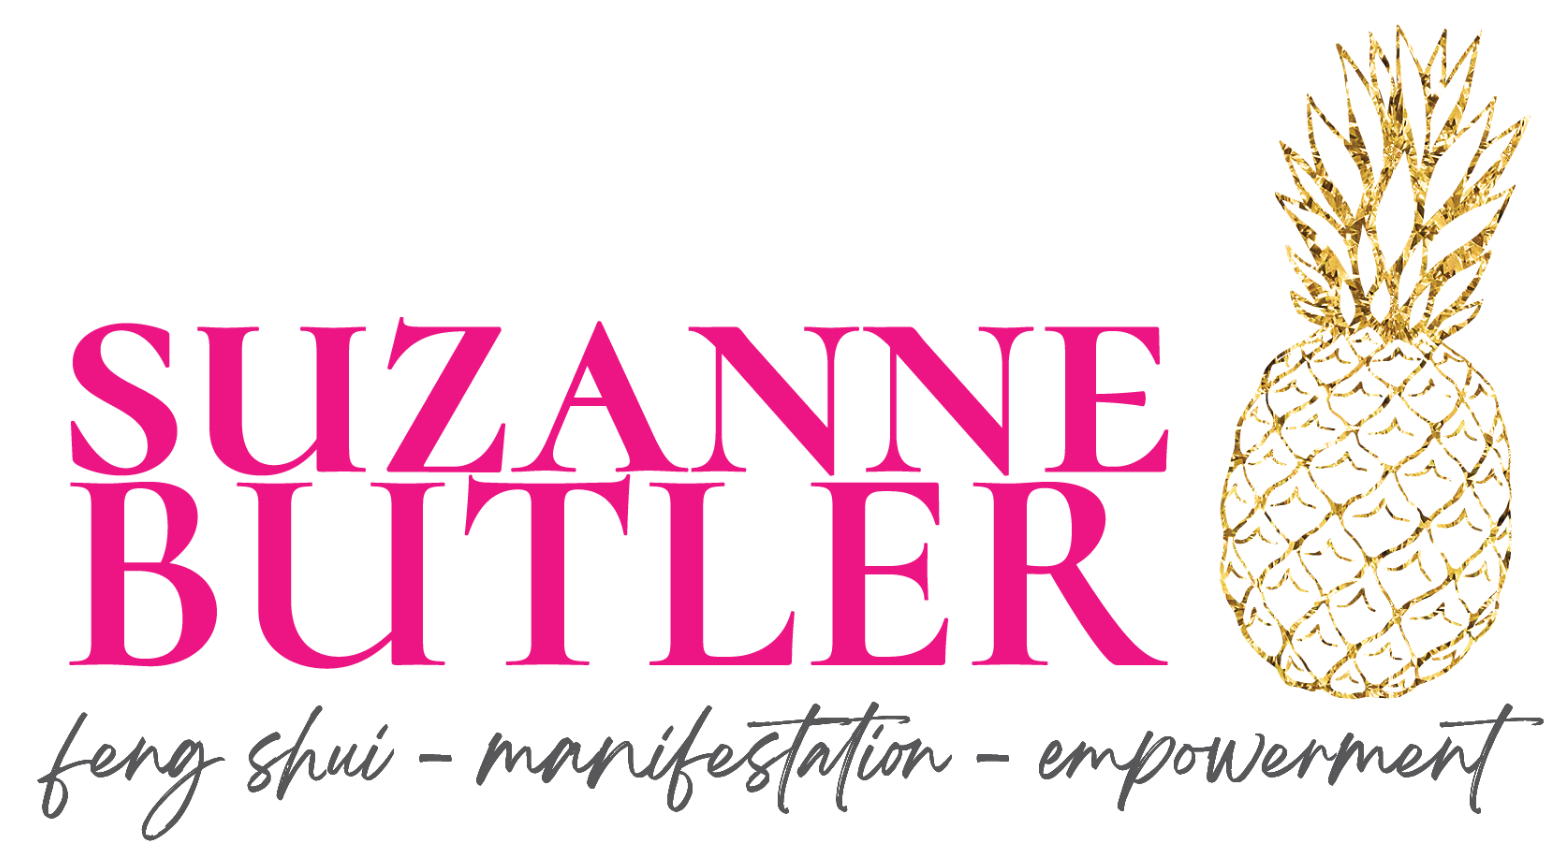 Suzanne Butler Lifestyle Design - Create the life you want on your terms